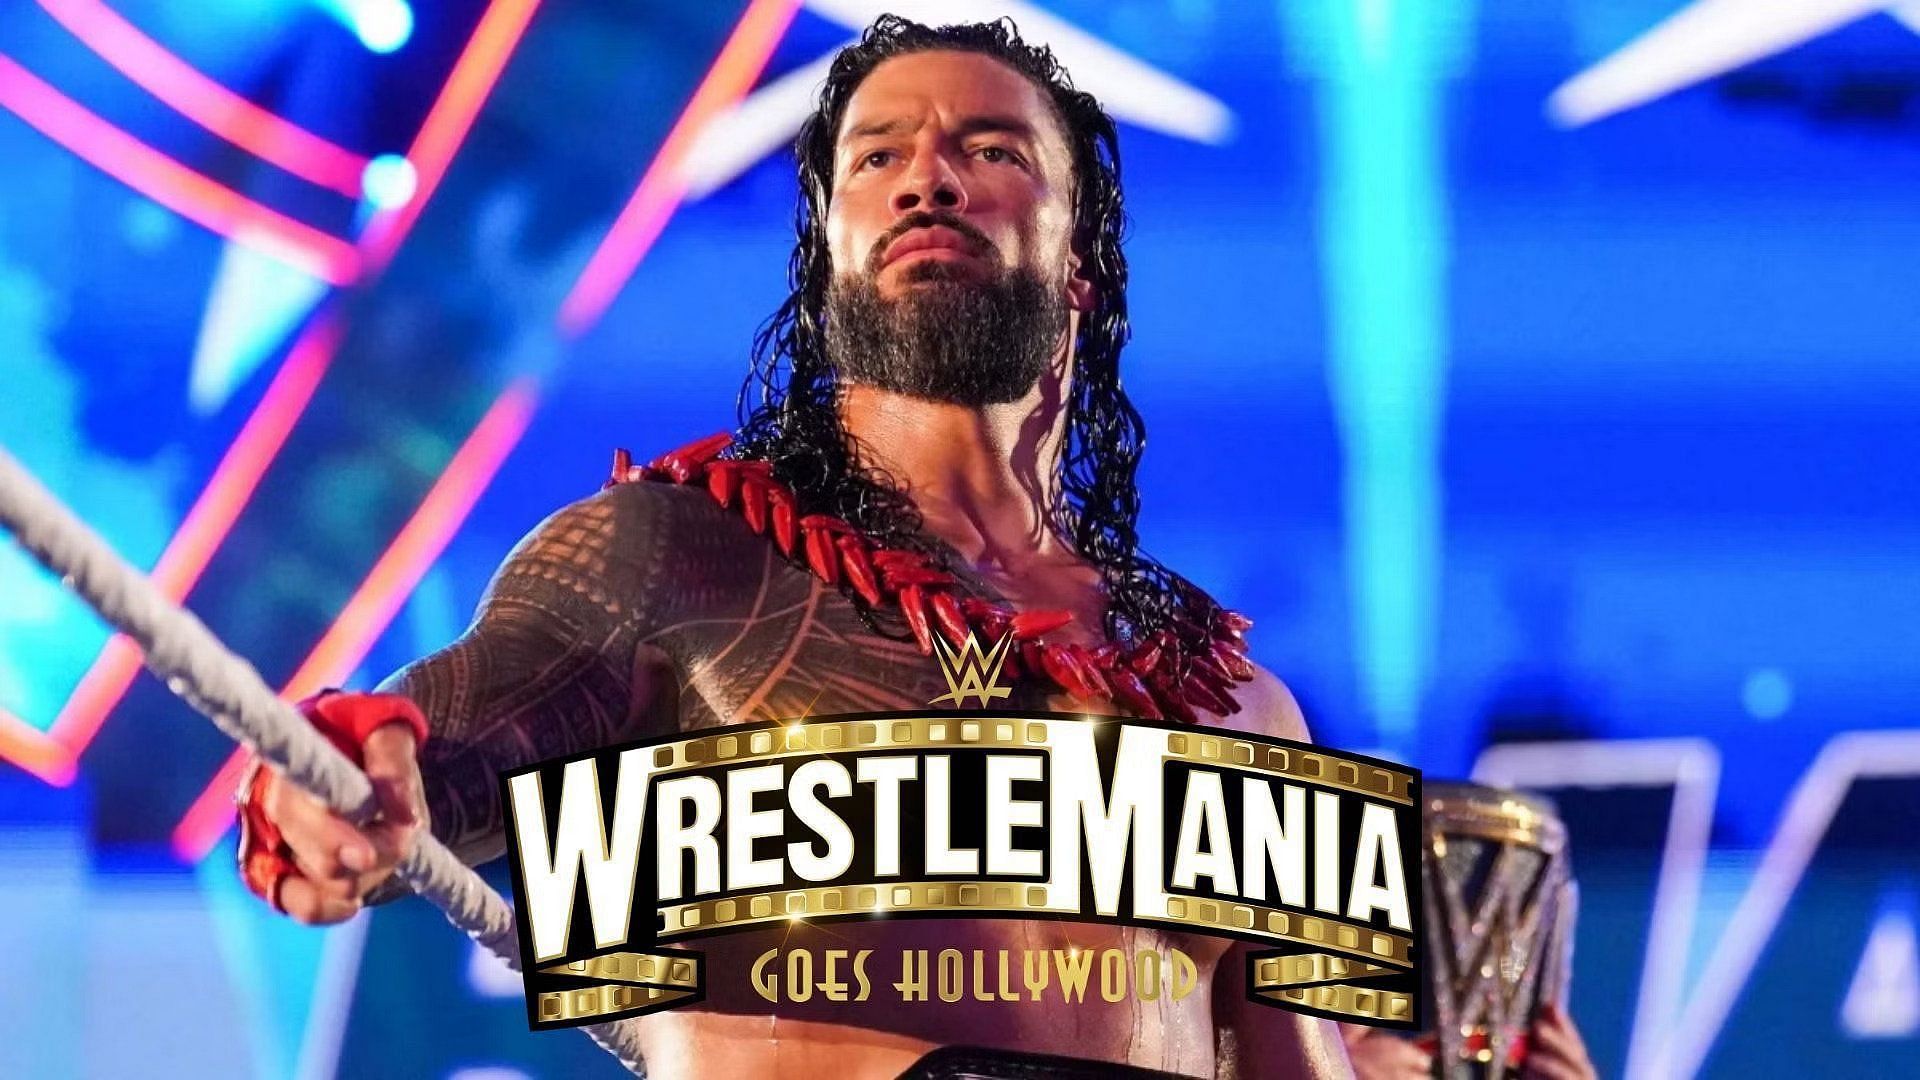 Roman Reigns could once again main event WrestleMania!